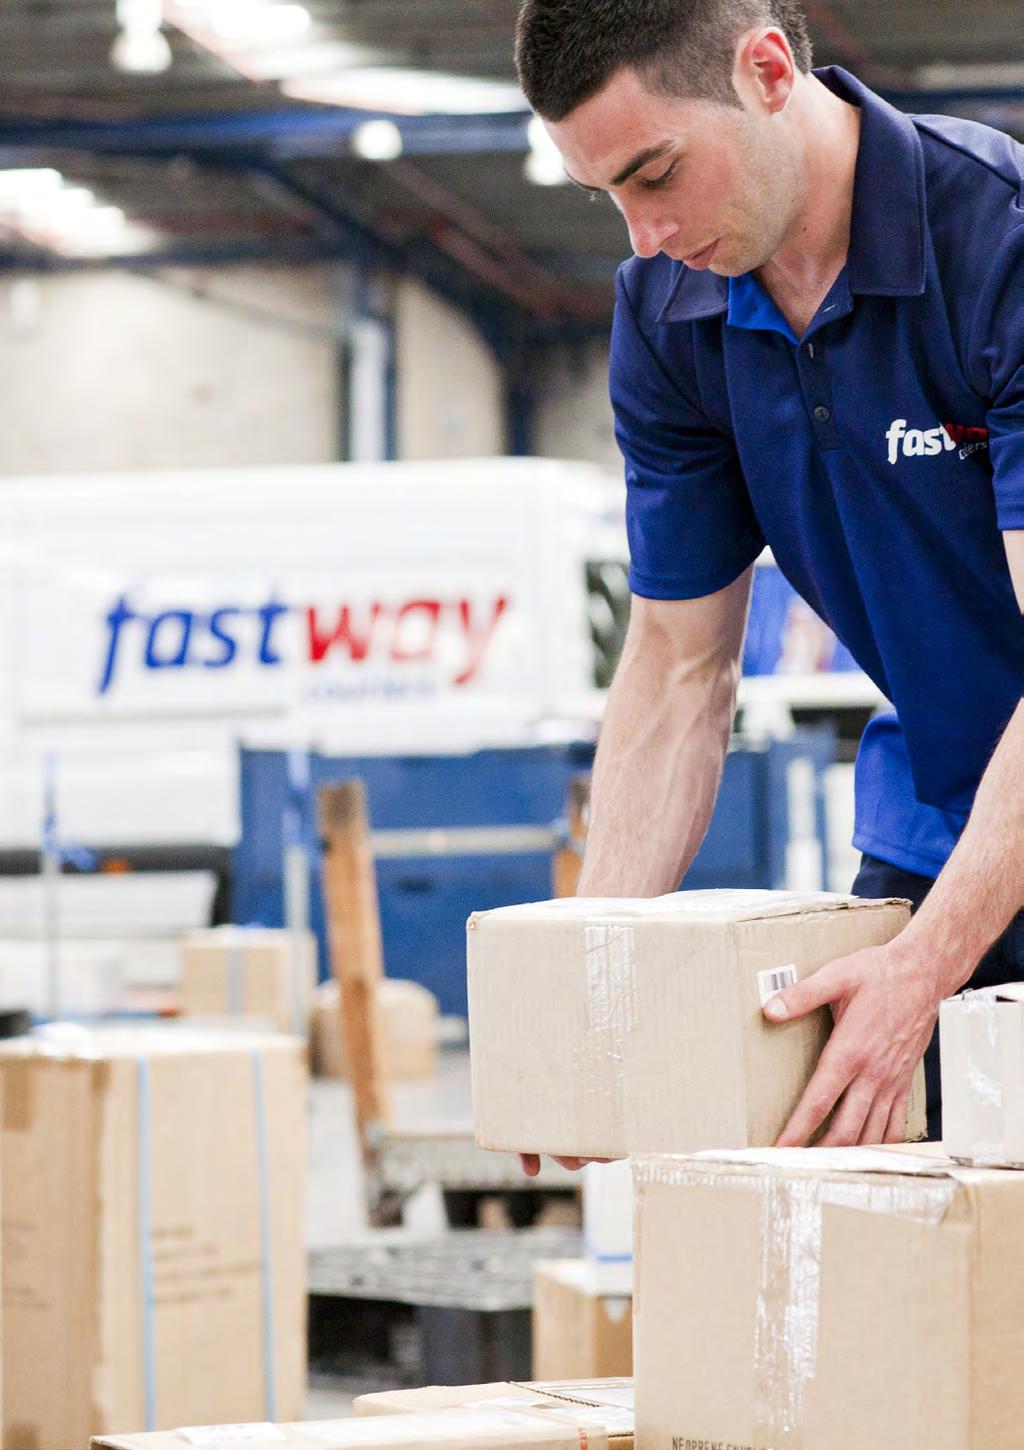 Our Corporate Identity The Fastway logo, uniforms, vehicle signage, and all promotional material reflect the Fastway corporate identity in the distinctive red, white and blue colours.